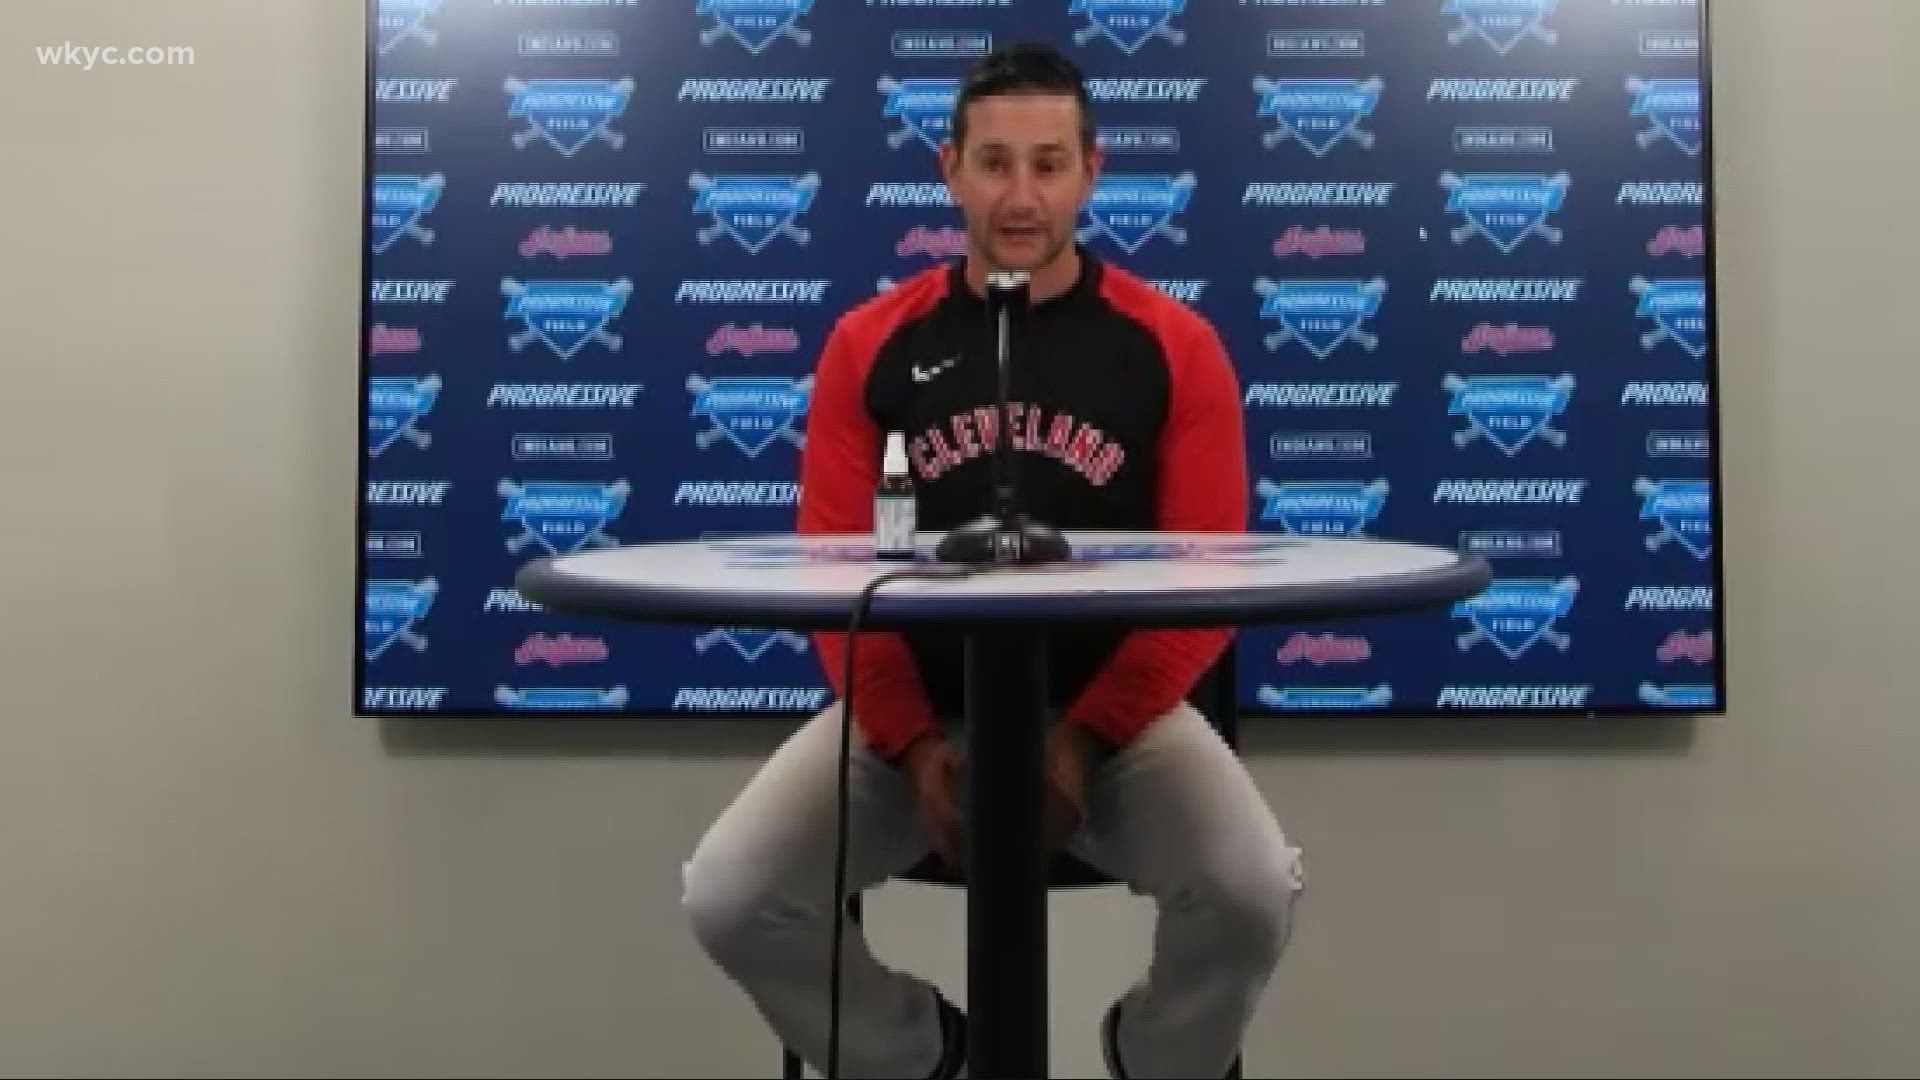 During the interview, Sweeney also reveals a funny story about head coach Terry Francona.